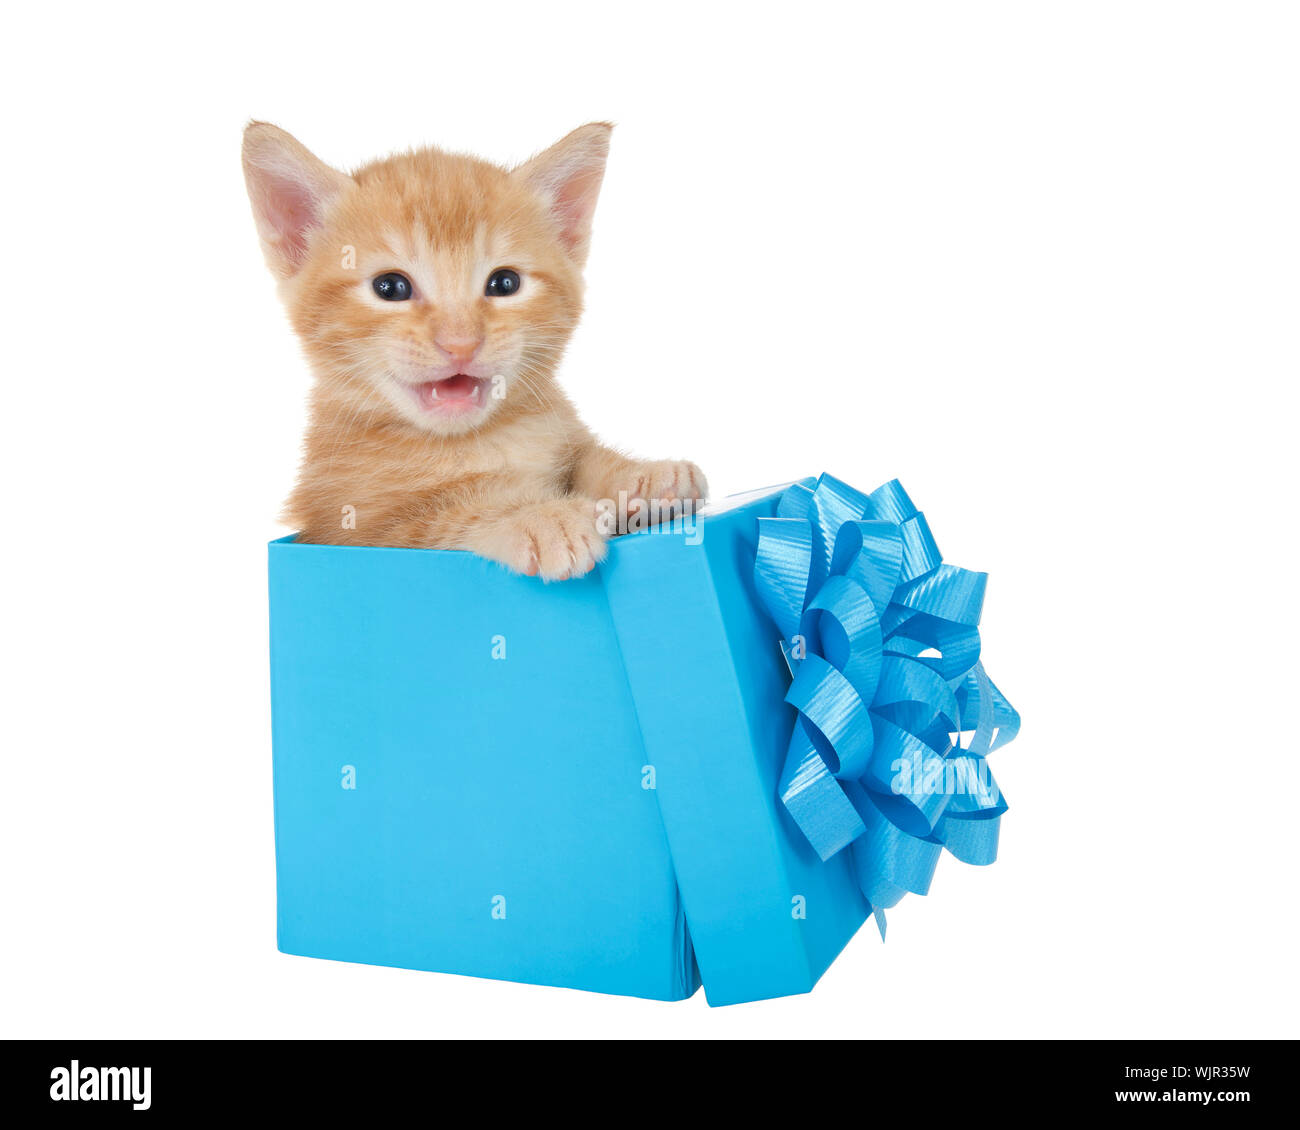 Adorable tiny orange ginger tabby kitten peaking out of a bright blue present box isolated on white background. Fun comical animal antics. Stock Photo